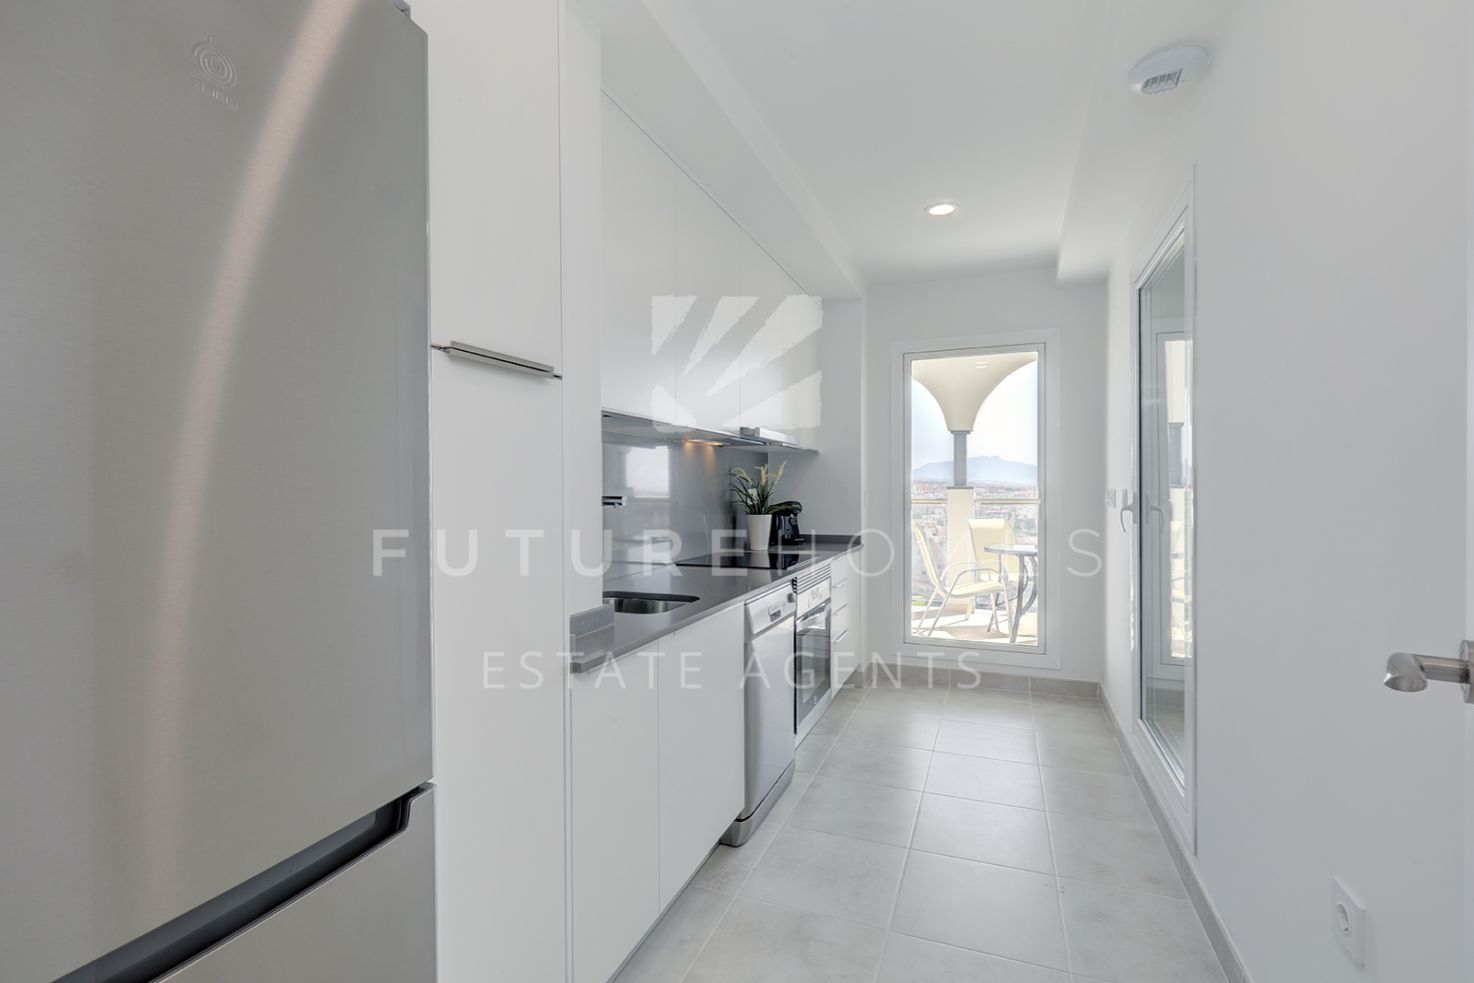 Spacious and immaculate apartment with super views in the heart of Estepona port